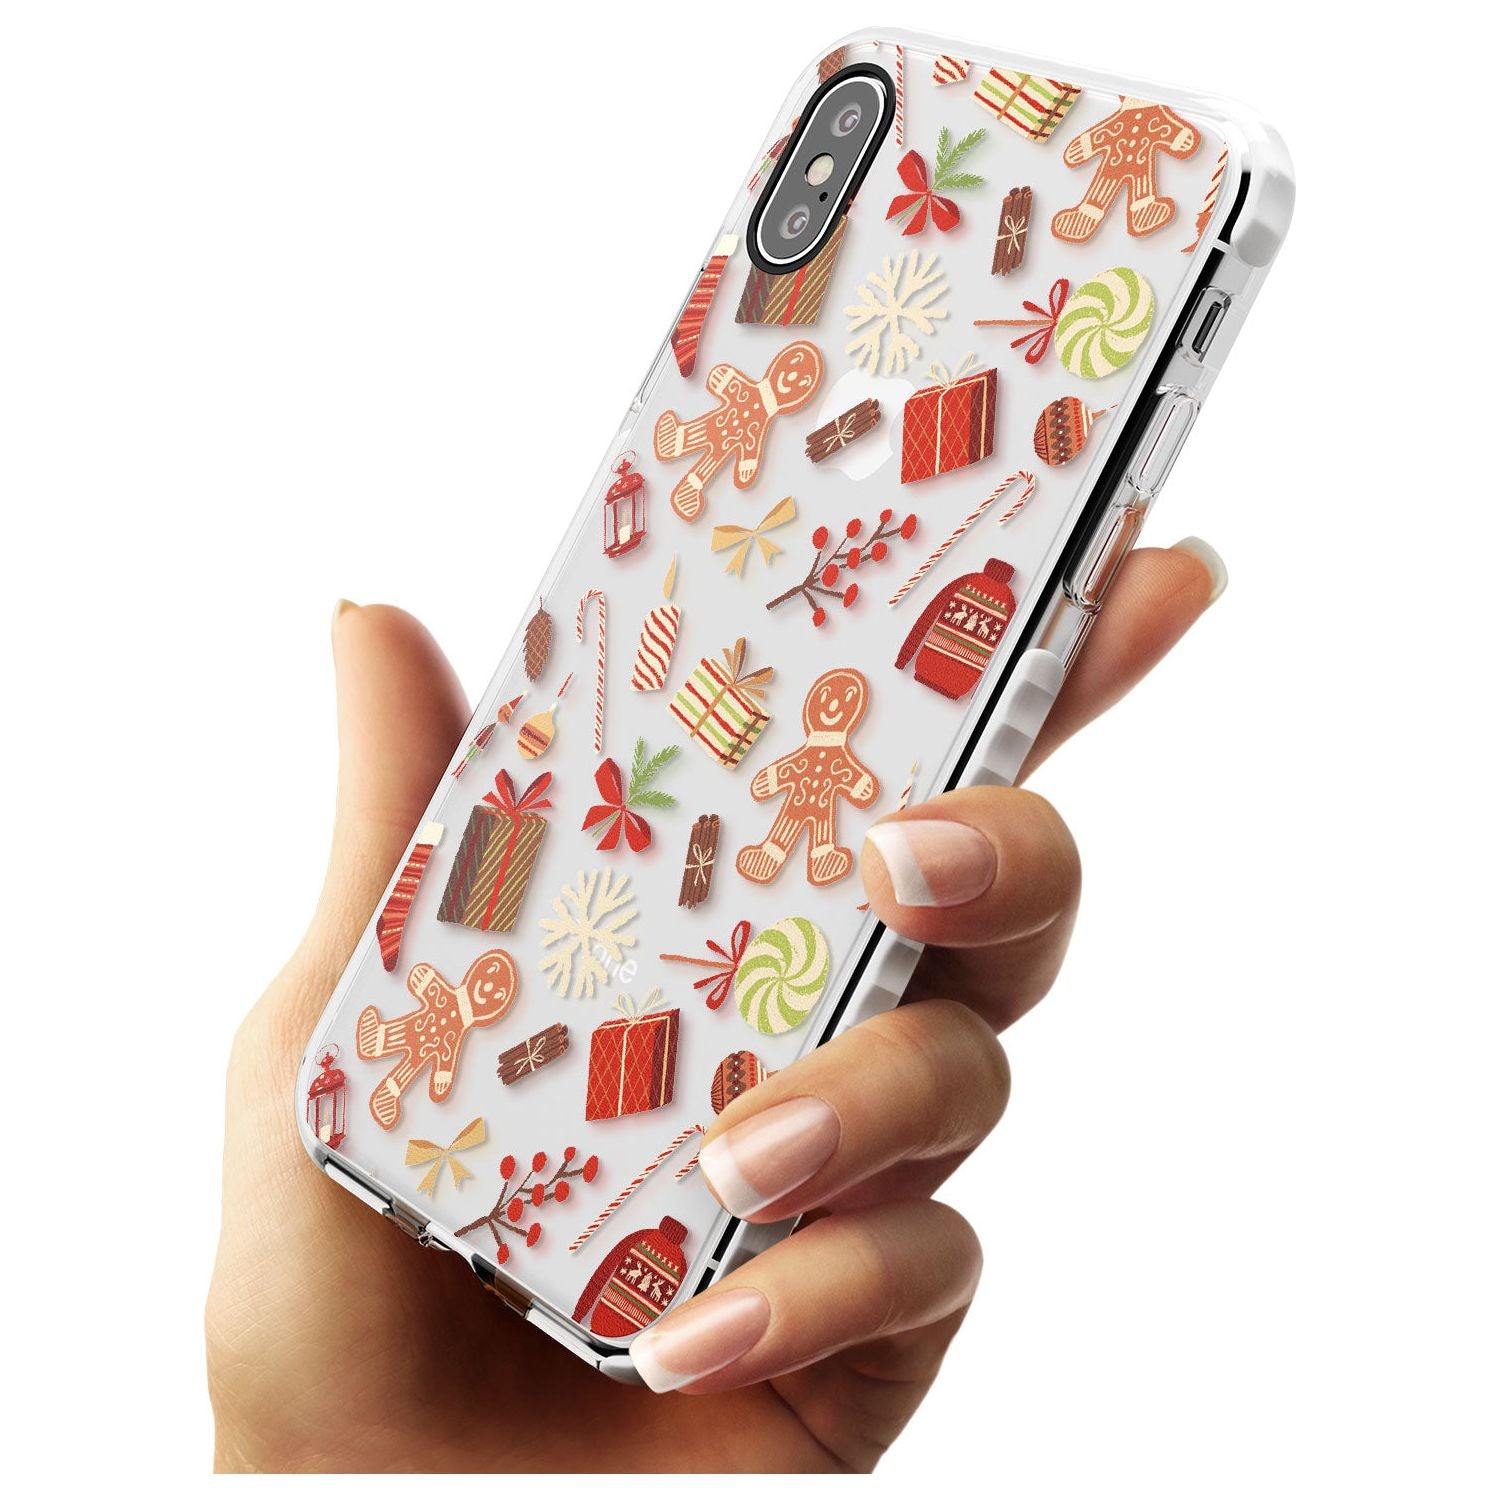 Christmas Assortments Impact Phone Case for iPhone X XS Max XR